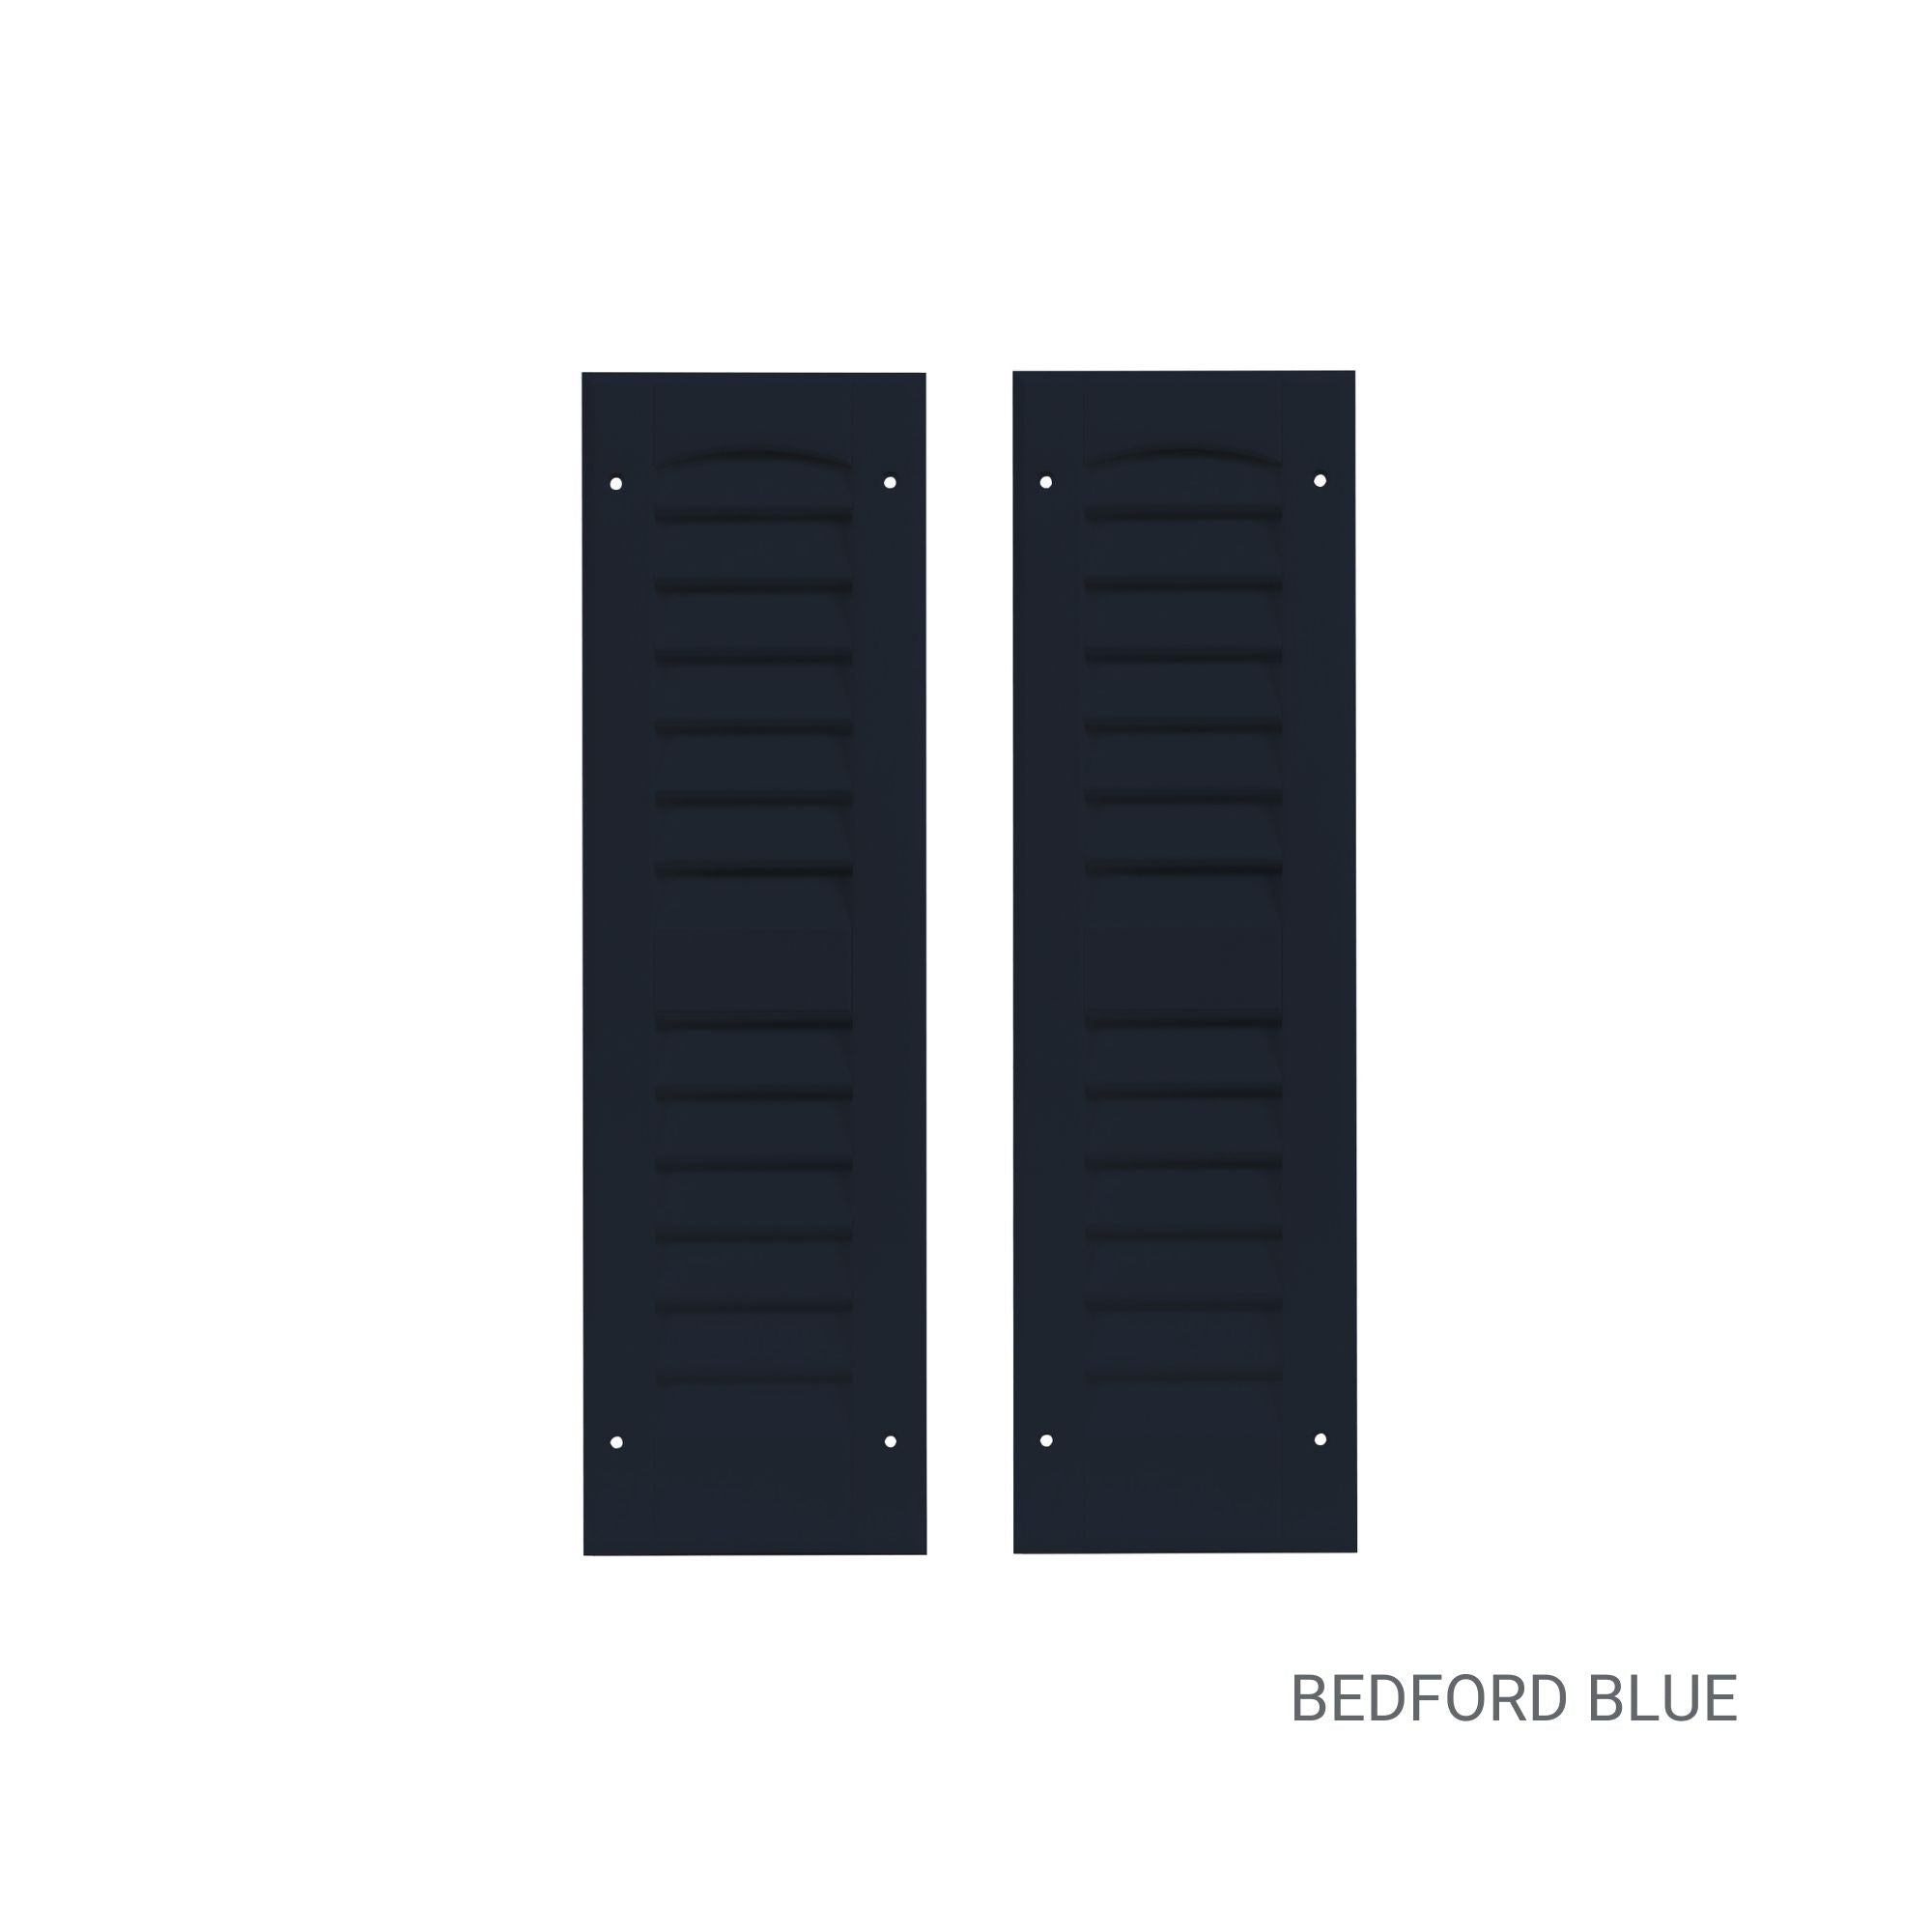 Pair of 6" W x 21" H Louvered Bedford Blue Shutters for Sheds, Playhouses, and MORE